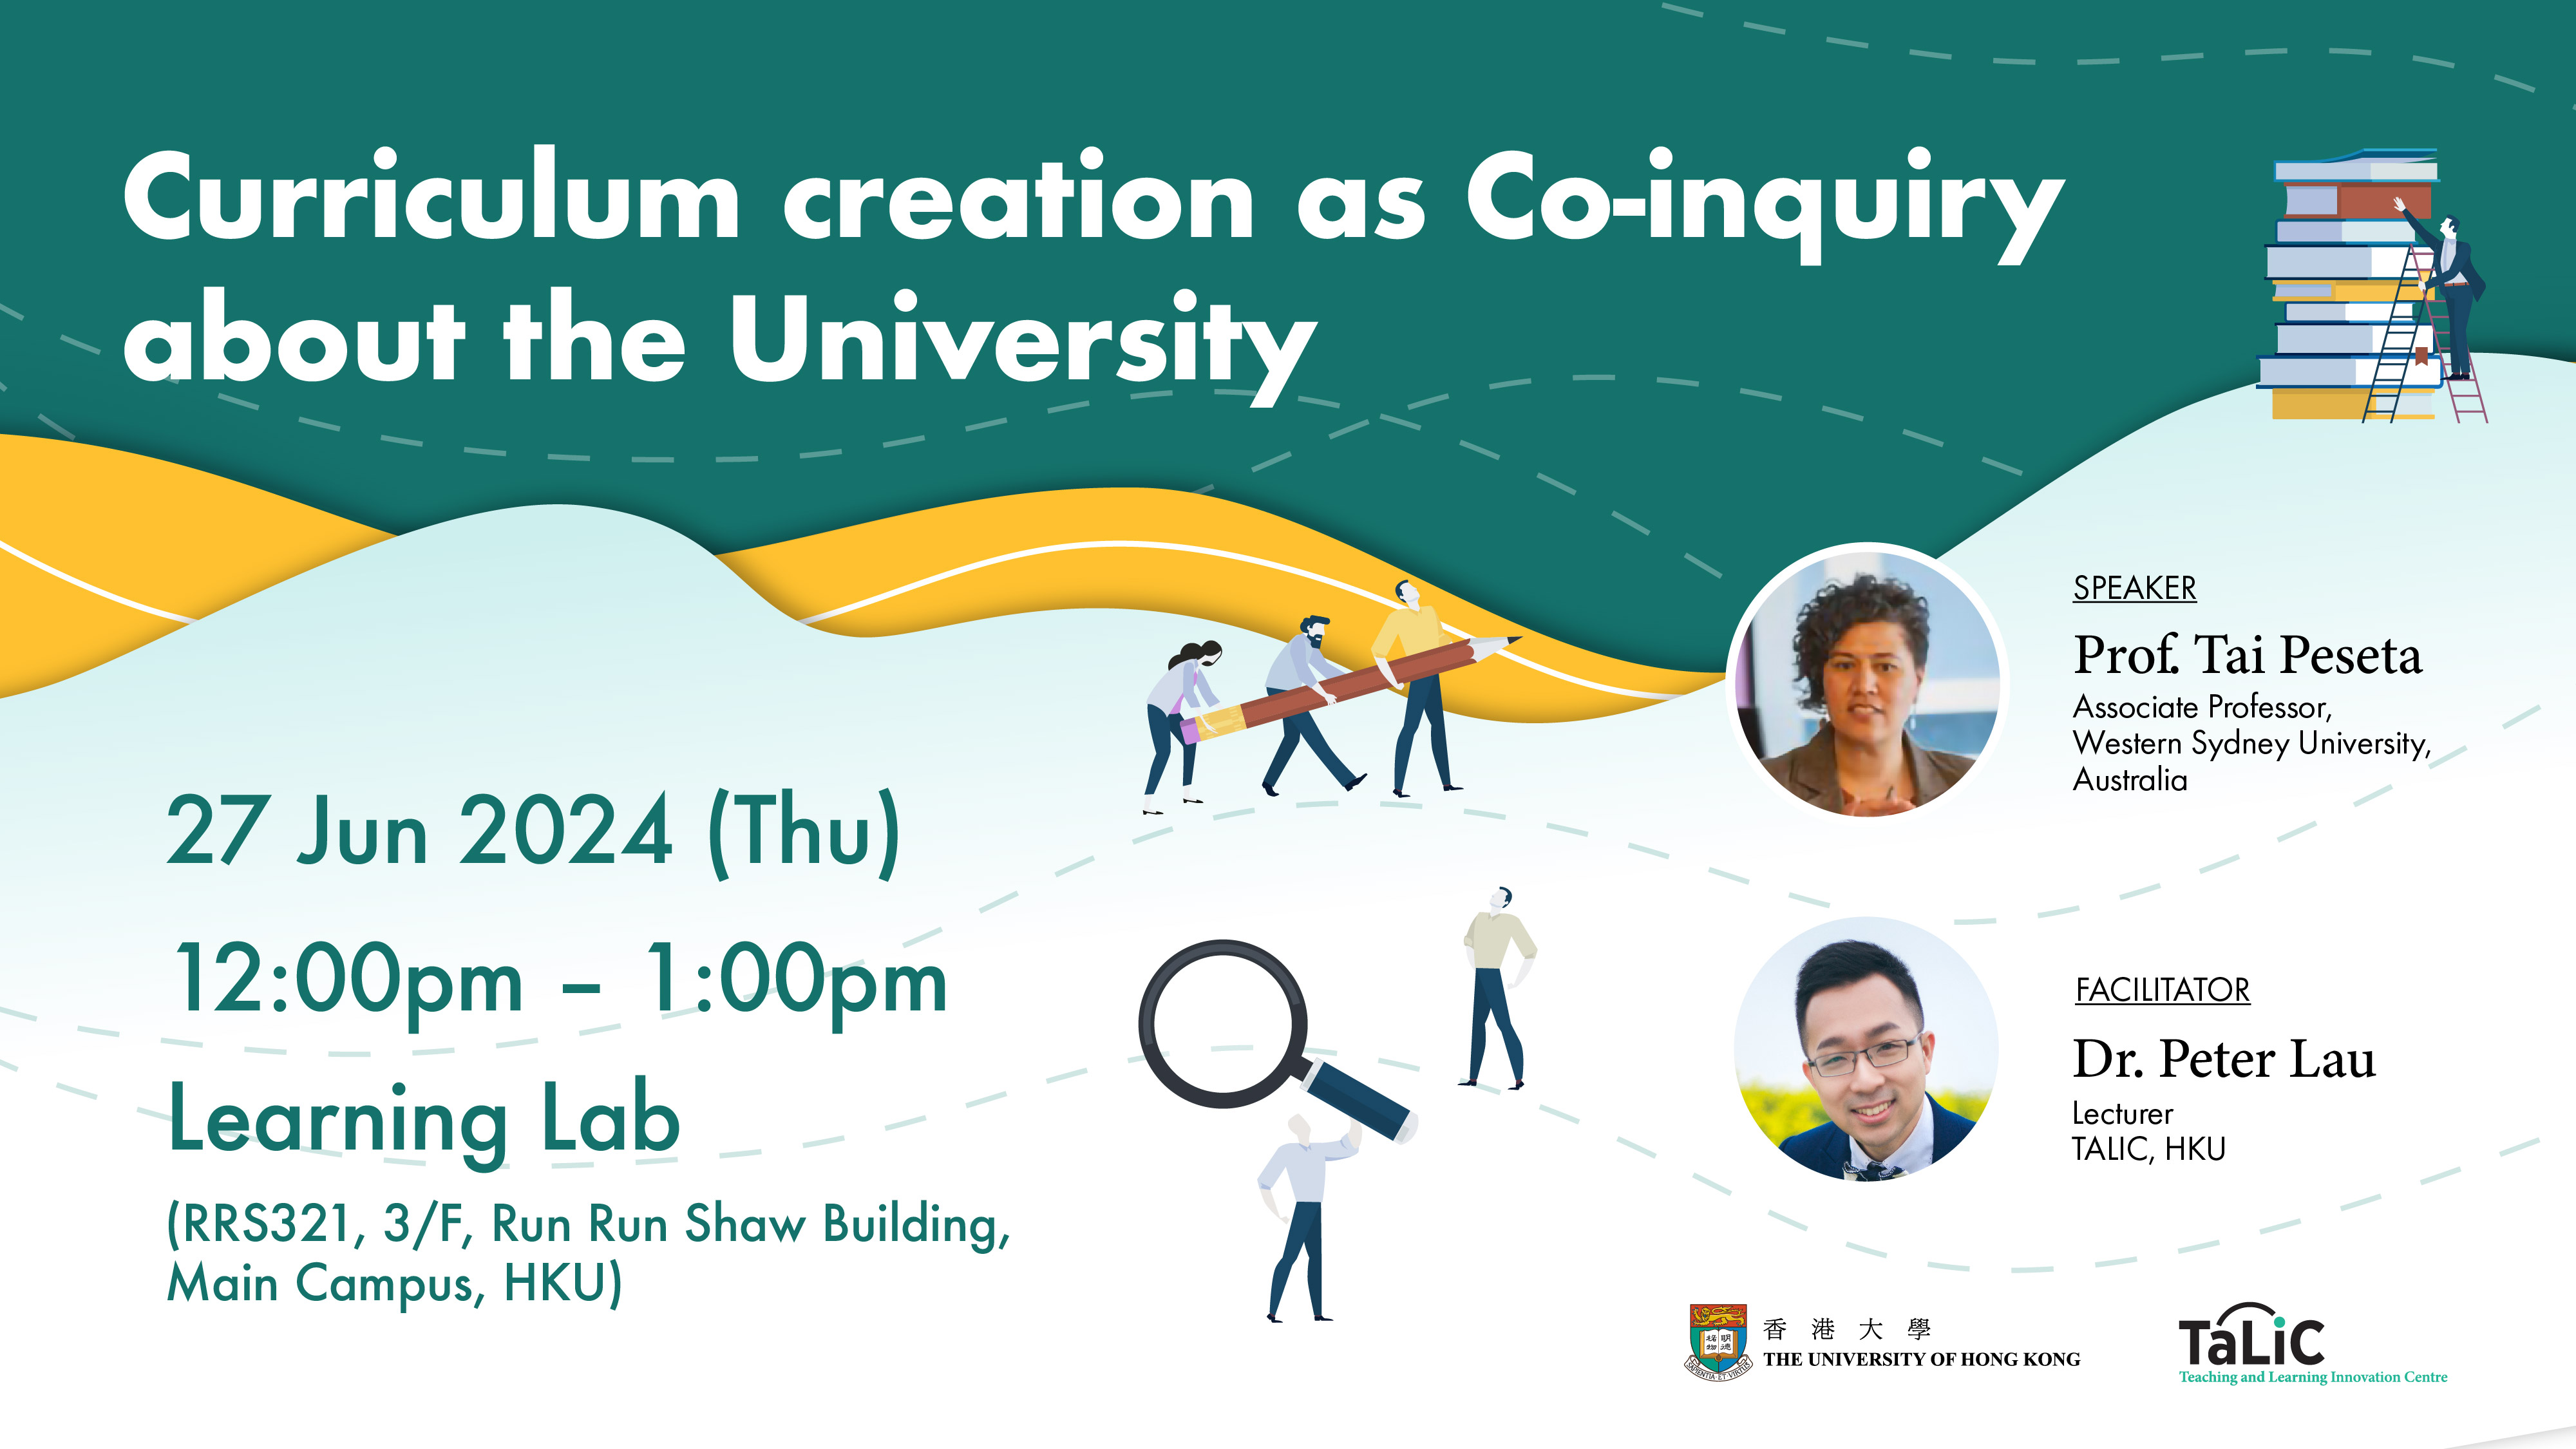 Curriculum creation as Co-inquiry about the University